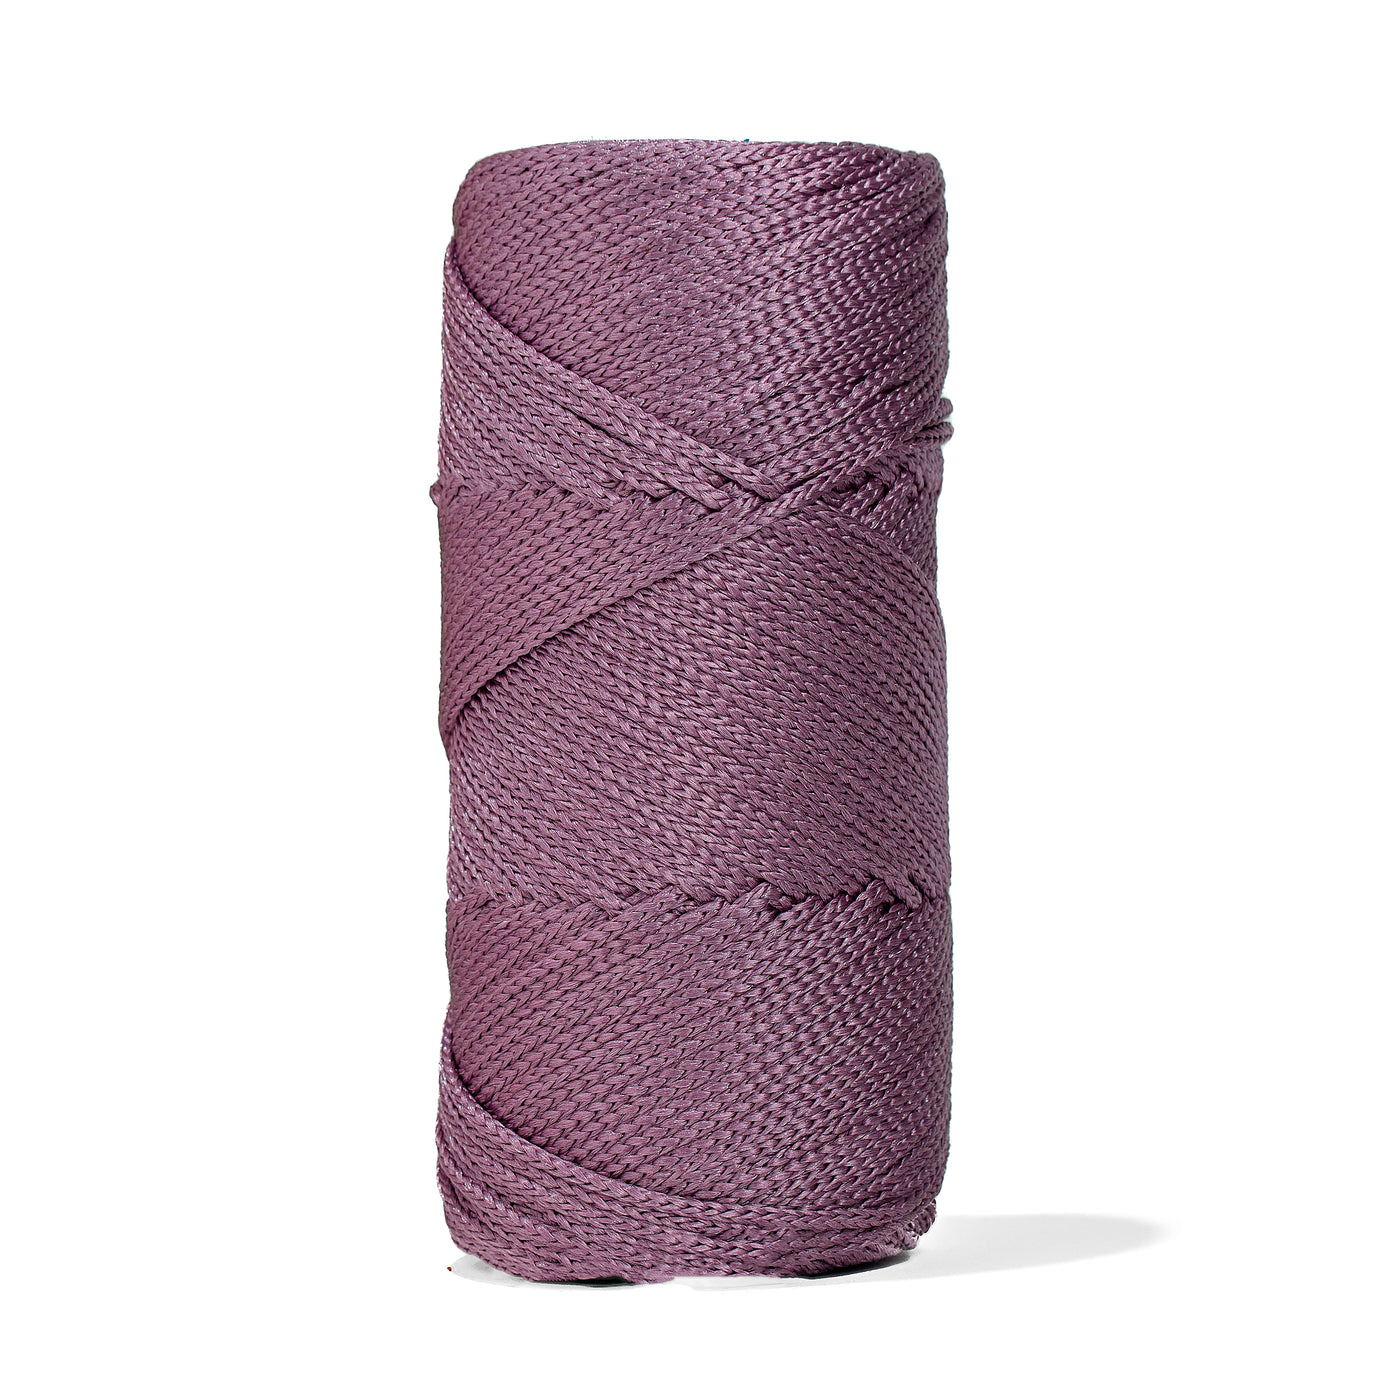 Outdoor 3 mm Macrame Braided Cord – Lavender Color